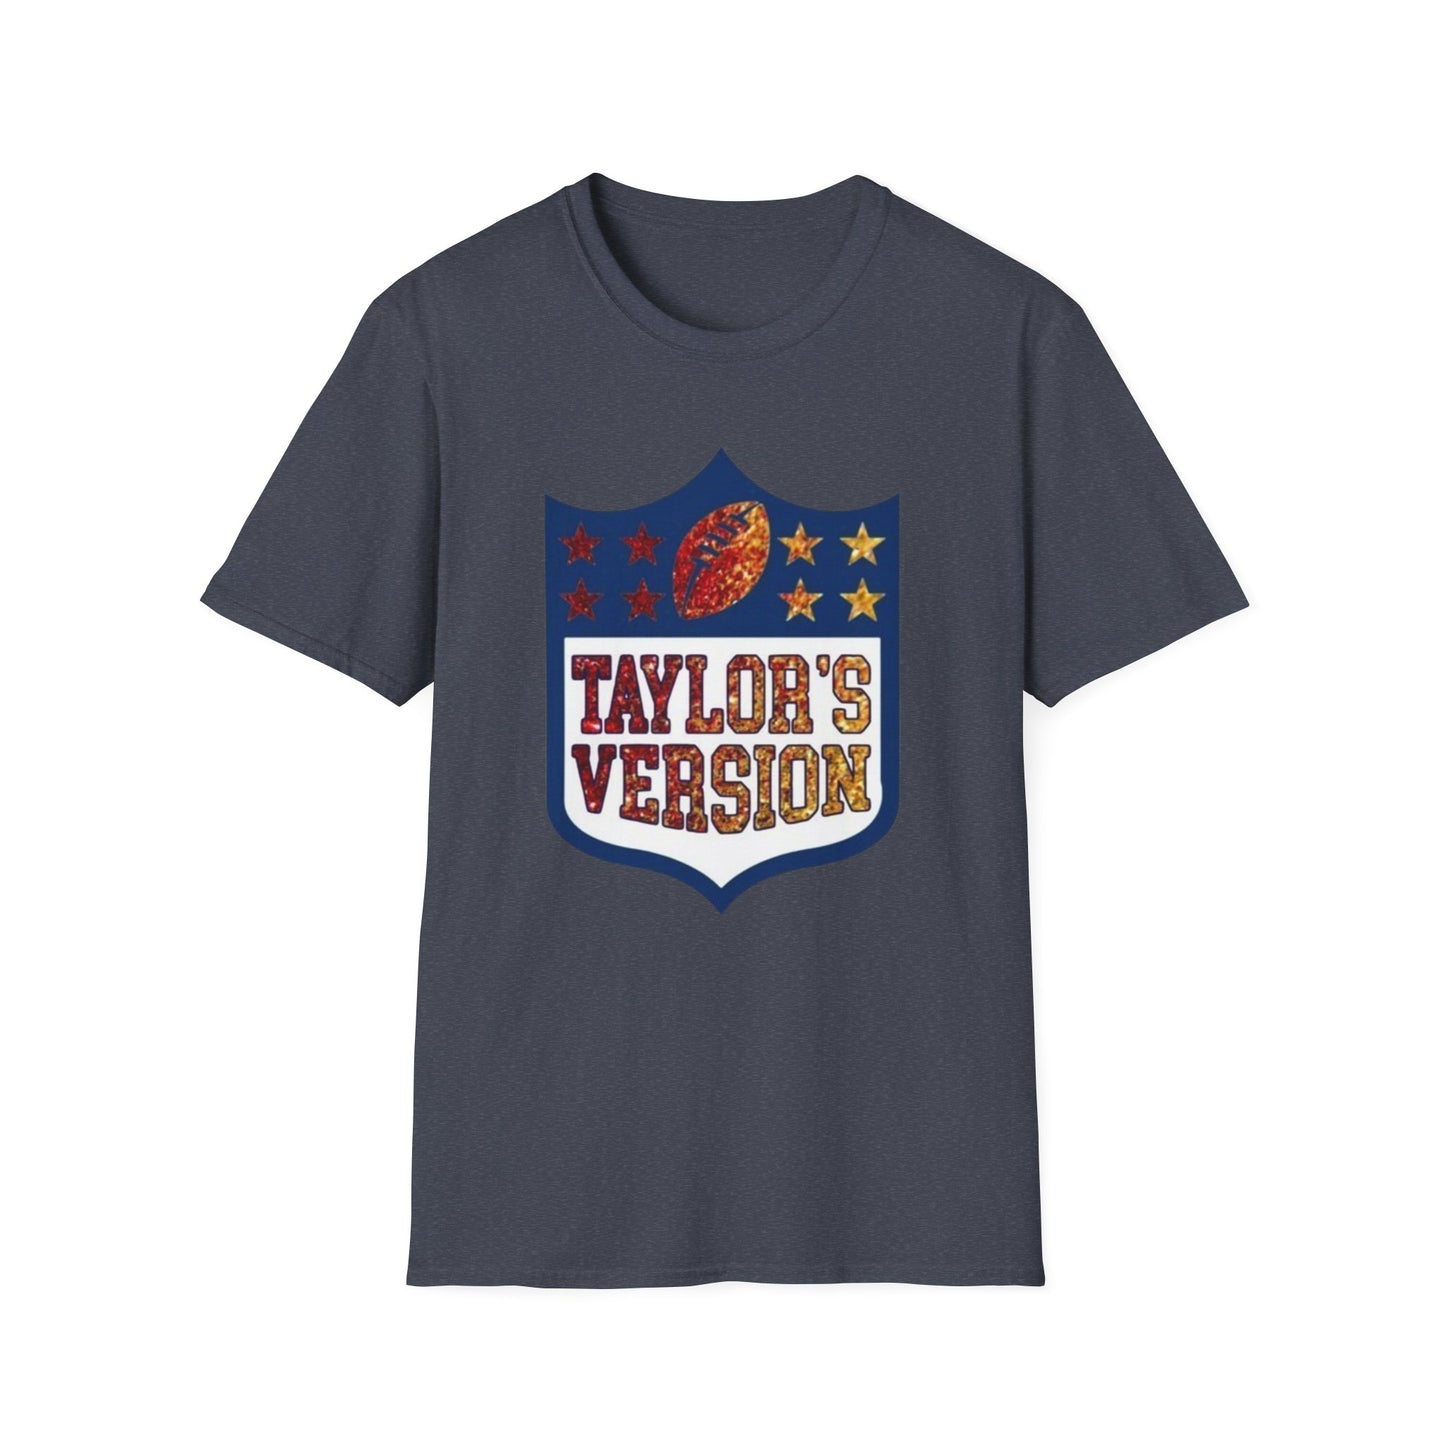 Taylor's Version - Unisex Softstyle T-Shirt